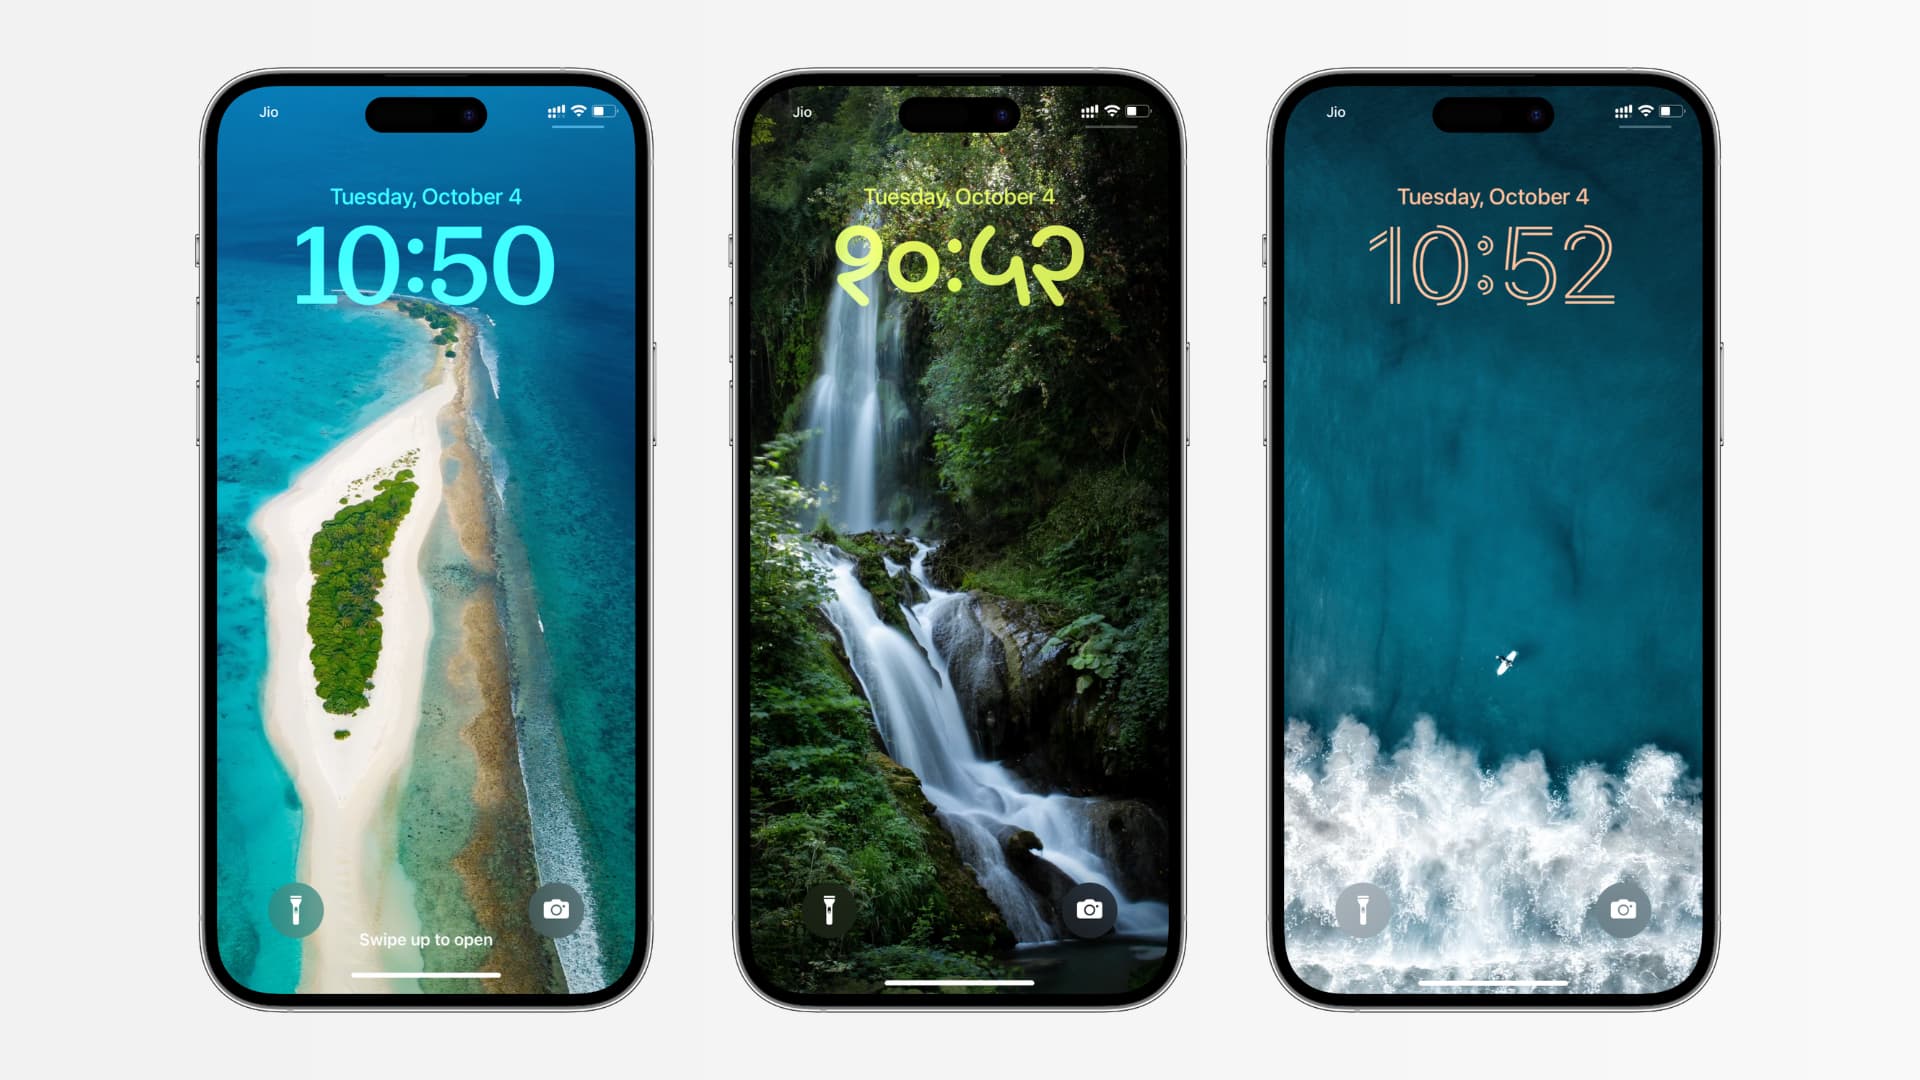 Three iPhone mockups showing iOS 16 Lock Screen with different clock styles